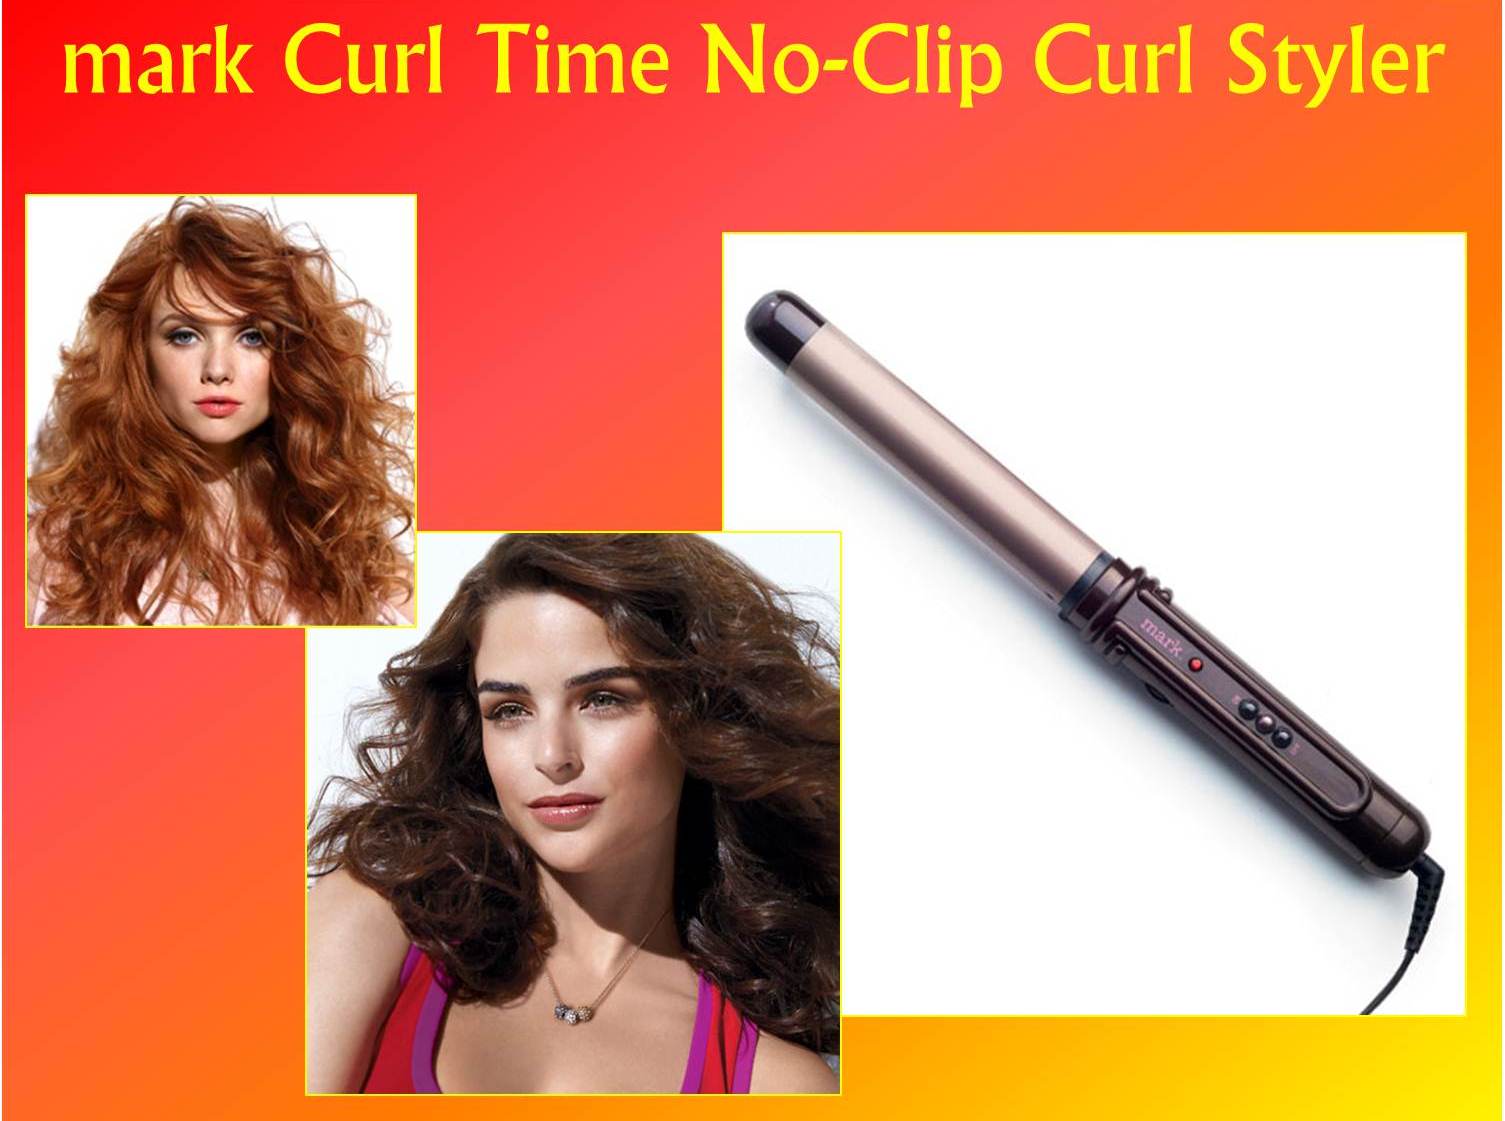 Curl time